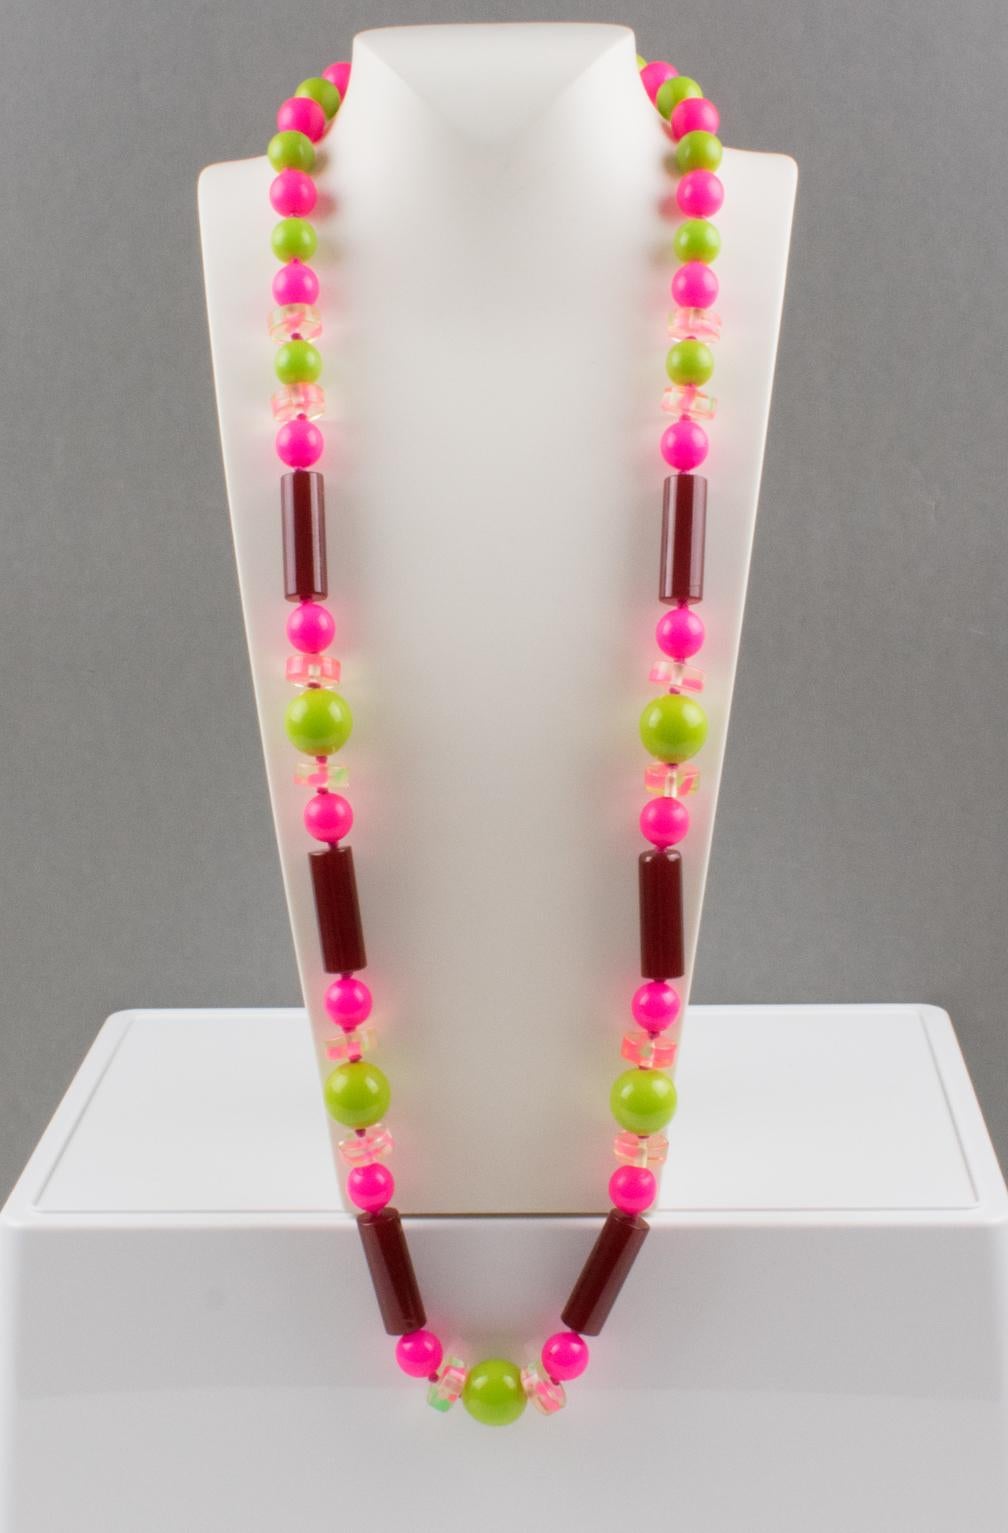 Bakelite and Lucite Extra Long Necklace Burgundy, Hot Pink, Apple Green Beads In Excellent Condition For Sale In Atlanta, GA